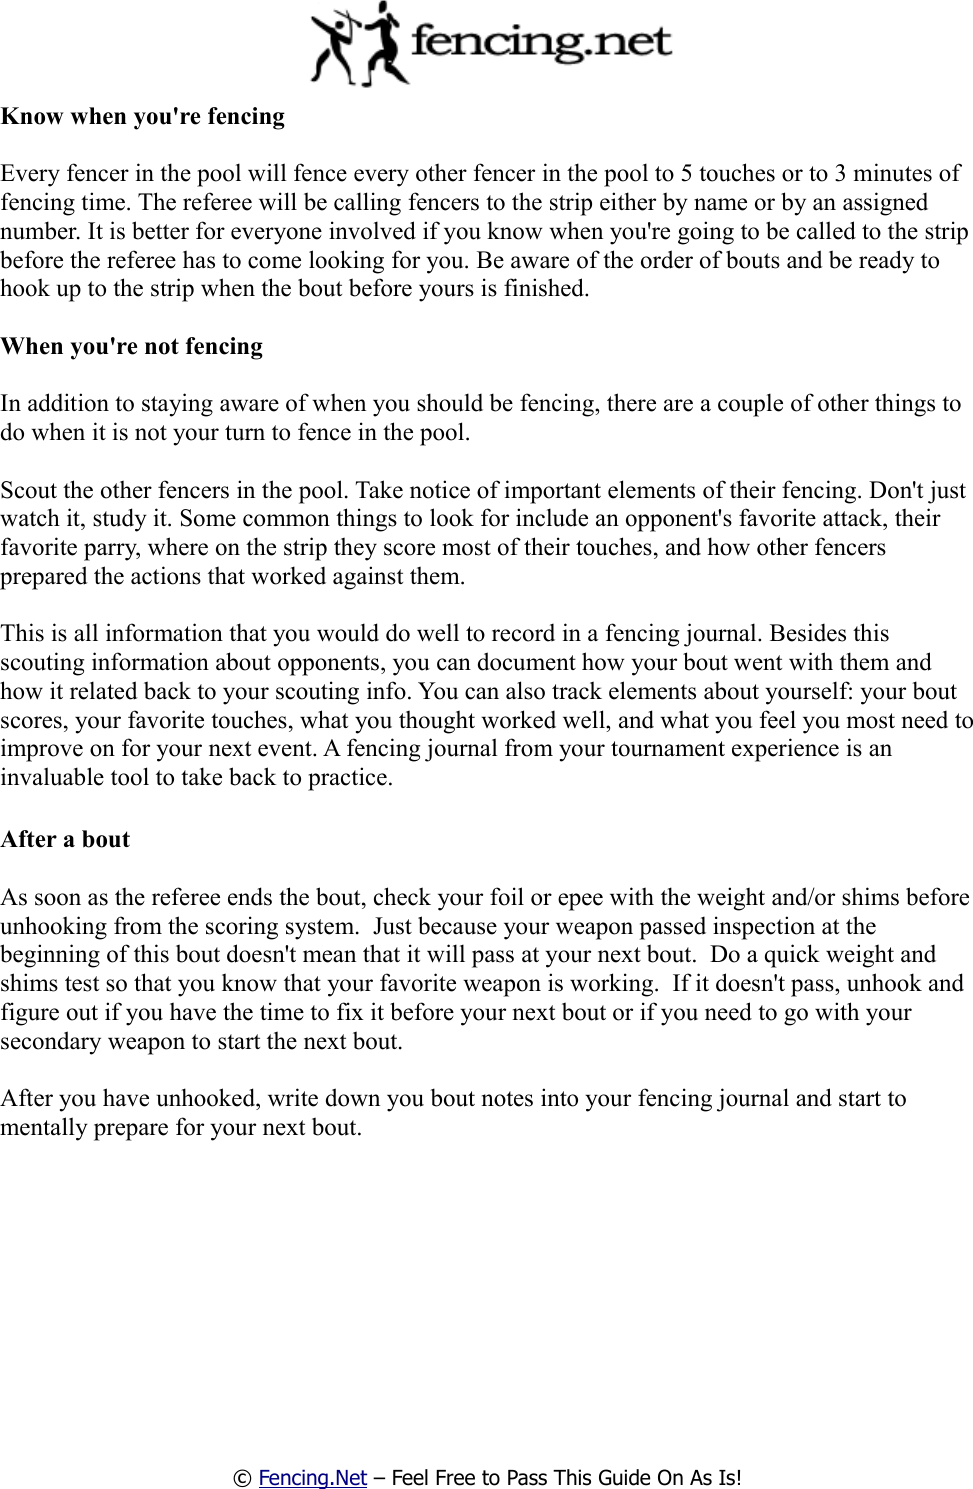 Page 6 of 10 - A Beginner's Guide To Their First Fencing Tournament